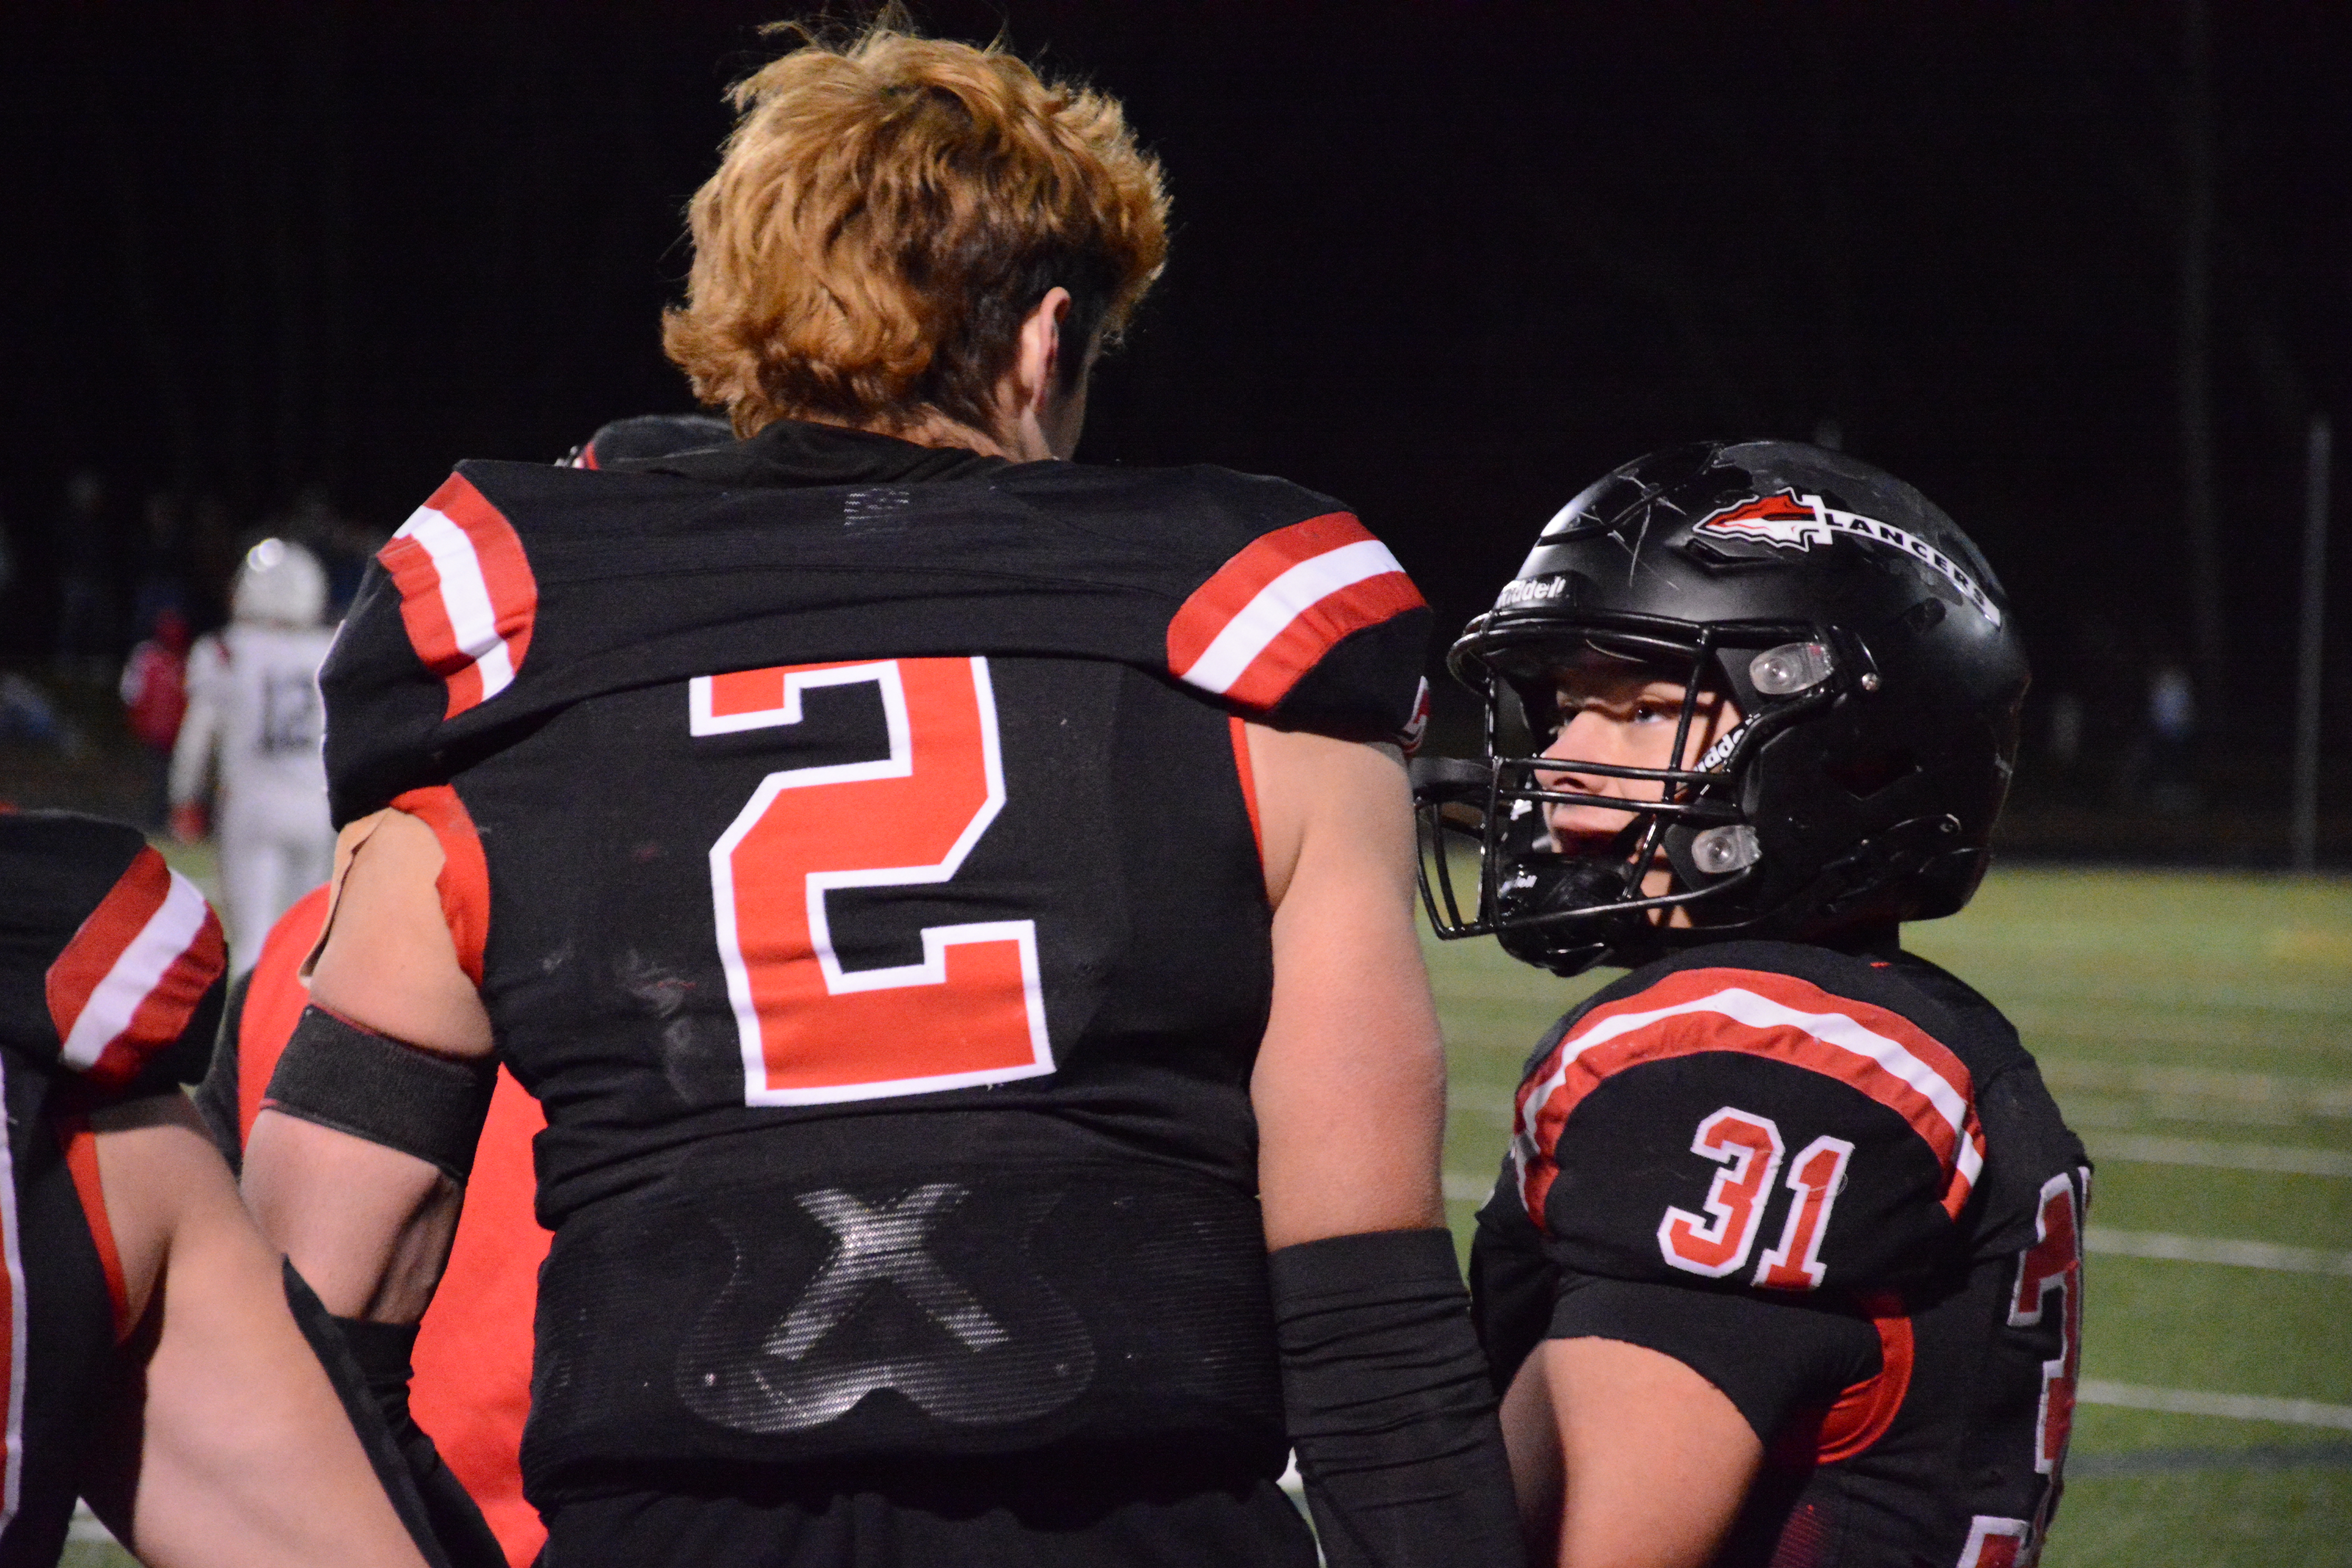 Linganore air attack too much to handle for Northern in 56-20 Semifinal win